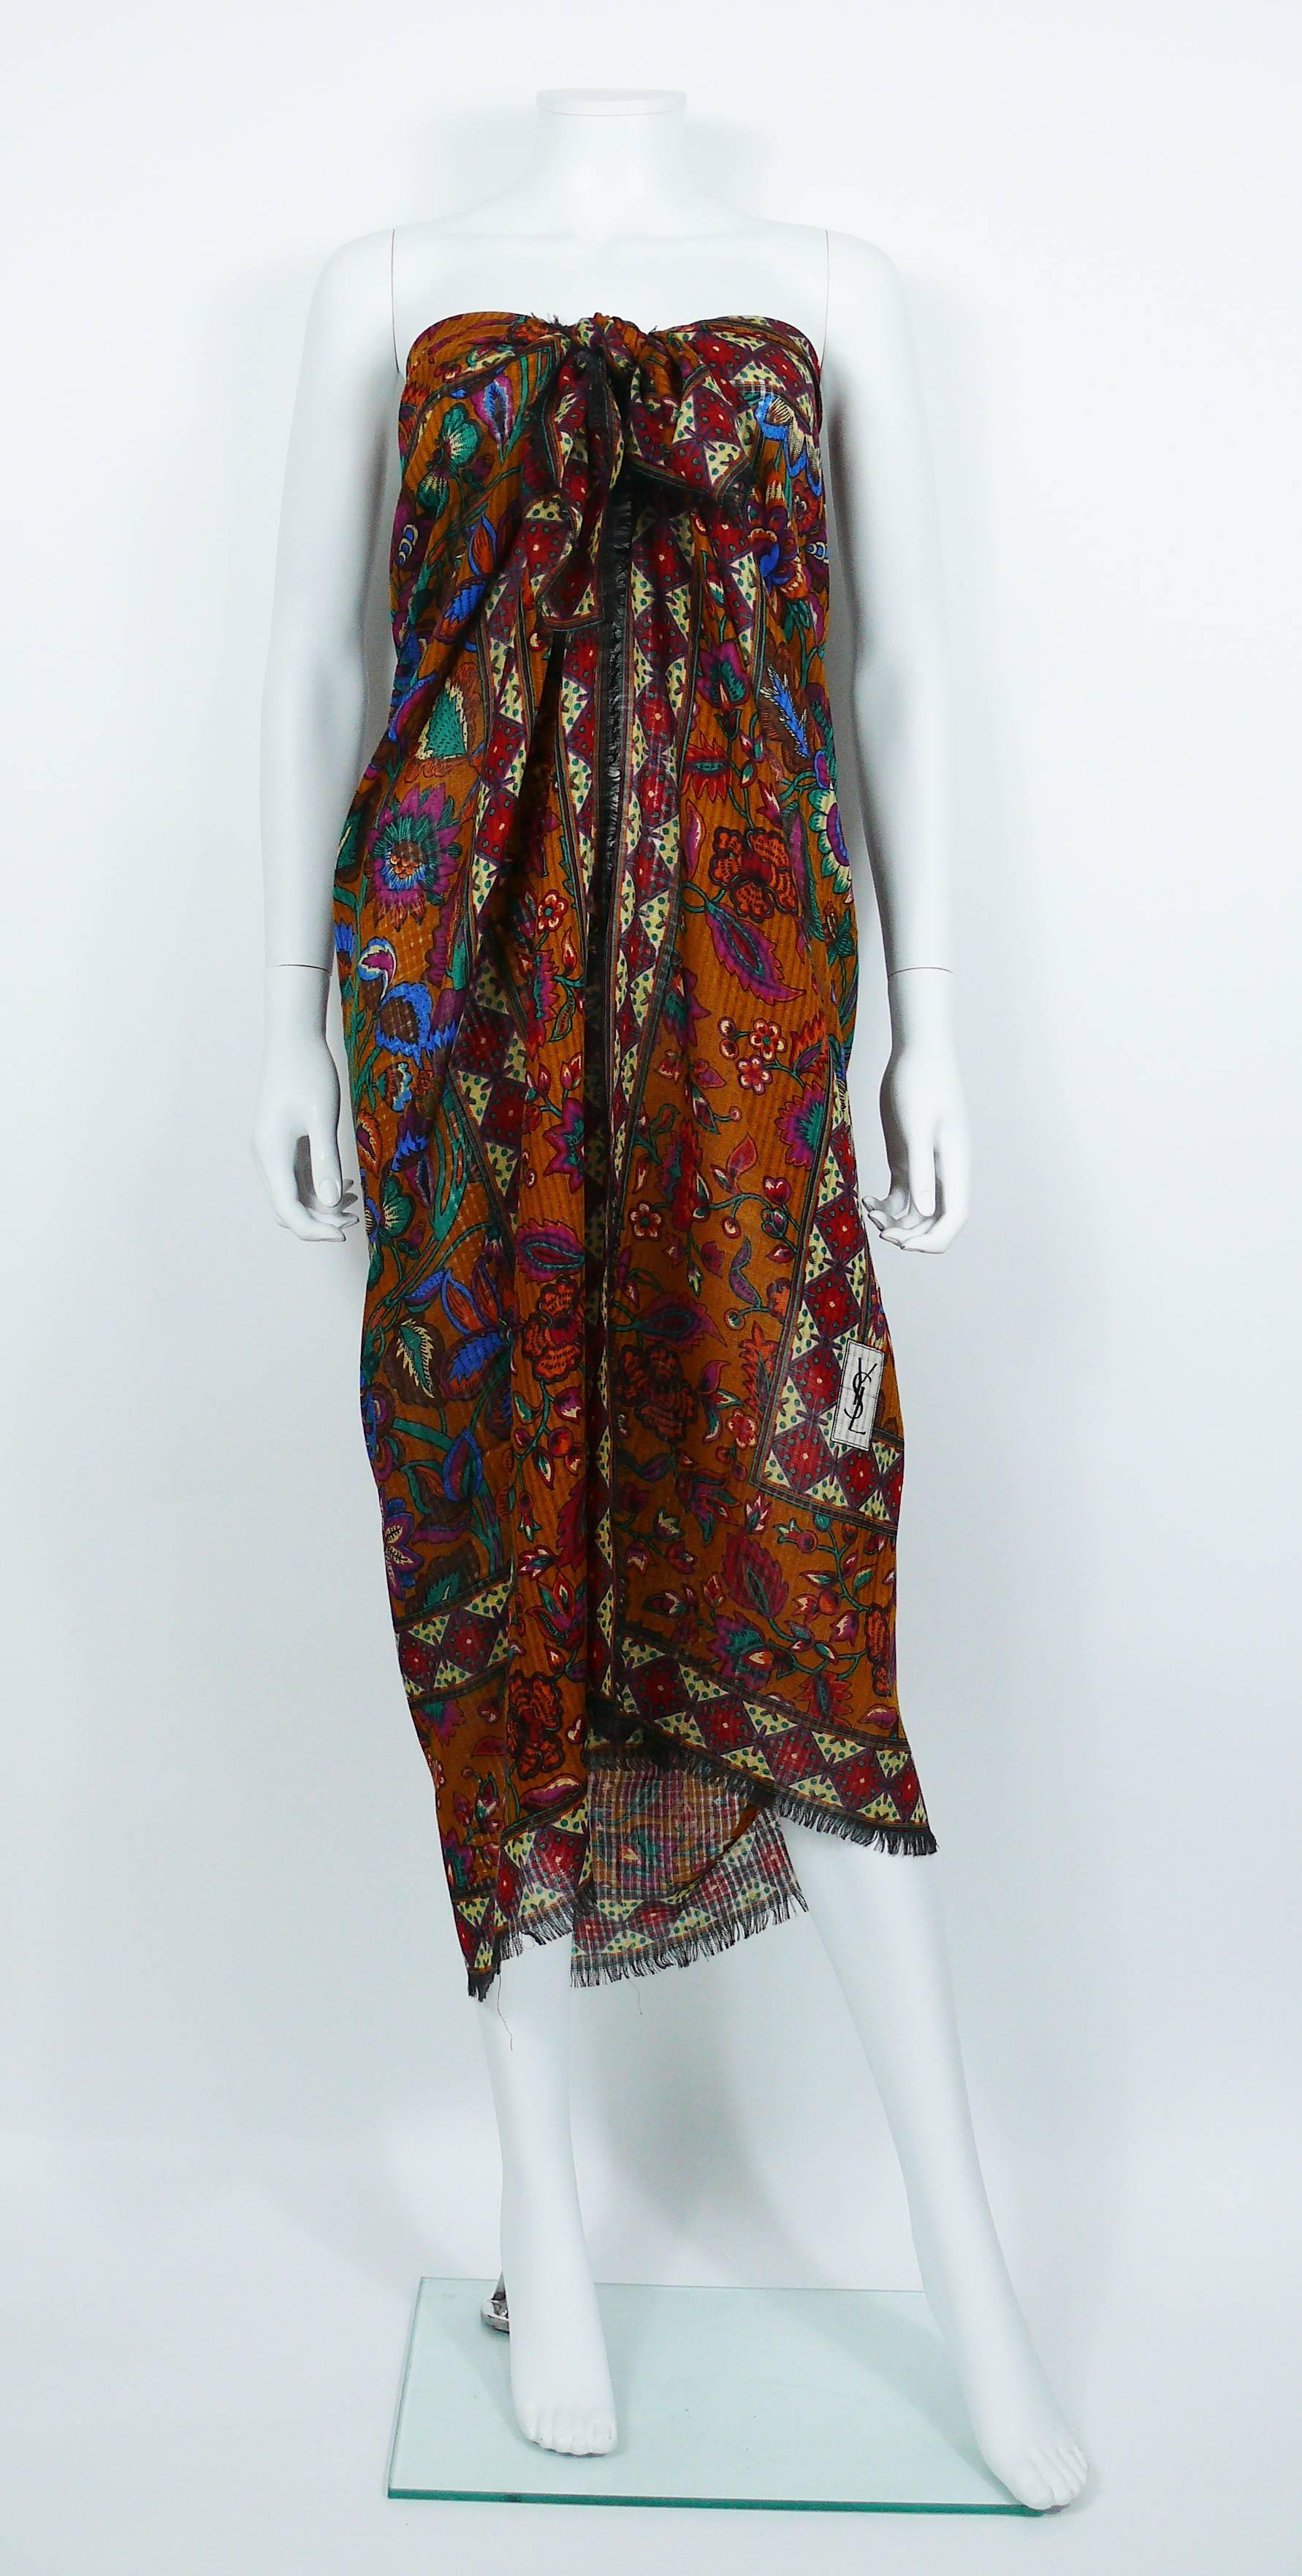 YVES SAINT LAURENT vintage 1970s peasant shawl featuring a multicolored floral design on a saffron color background. Fringed borders.

Printed YSL.
No labels attached.

Indicative measurements : 132 cm (51.97 inches) x 132 cm (51.97